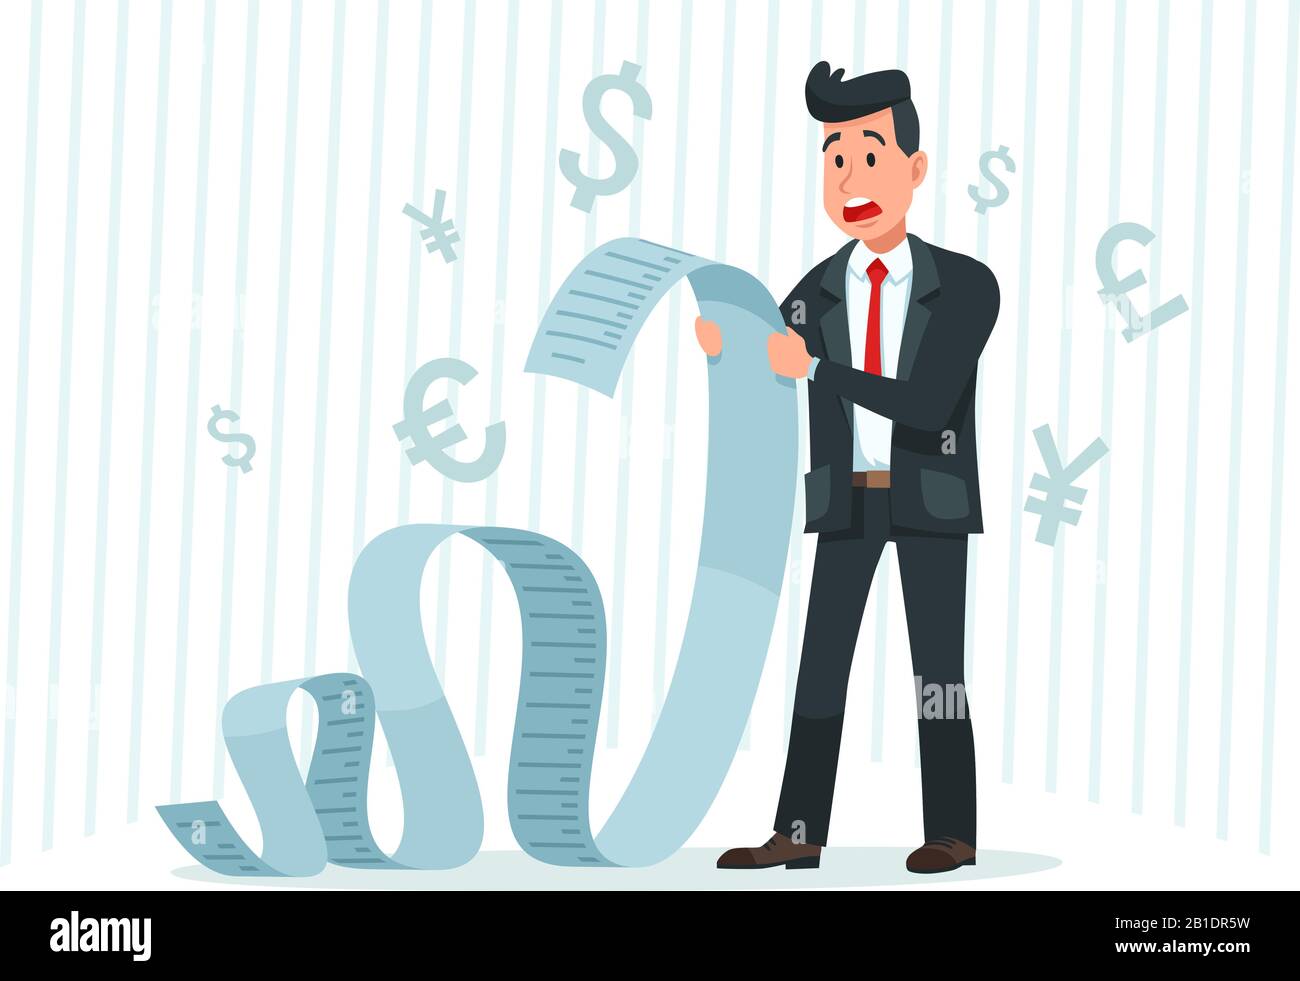 Pay big bill. Businessman holding long bill, shocked by payment amount and paying finance bills cartoon vector Stock Vector